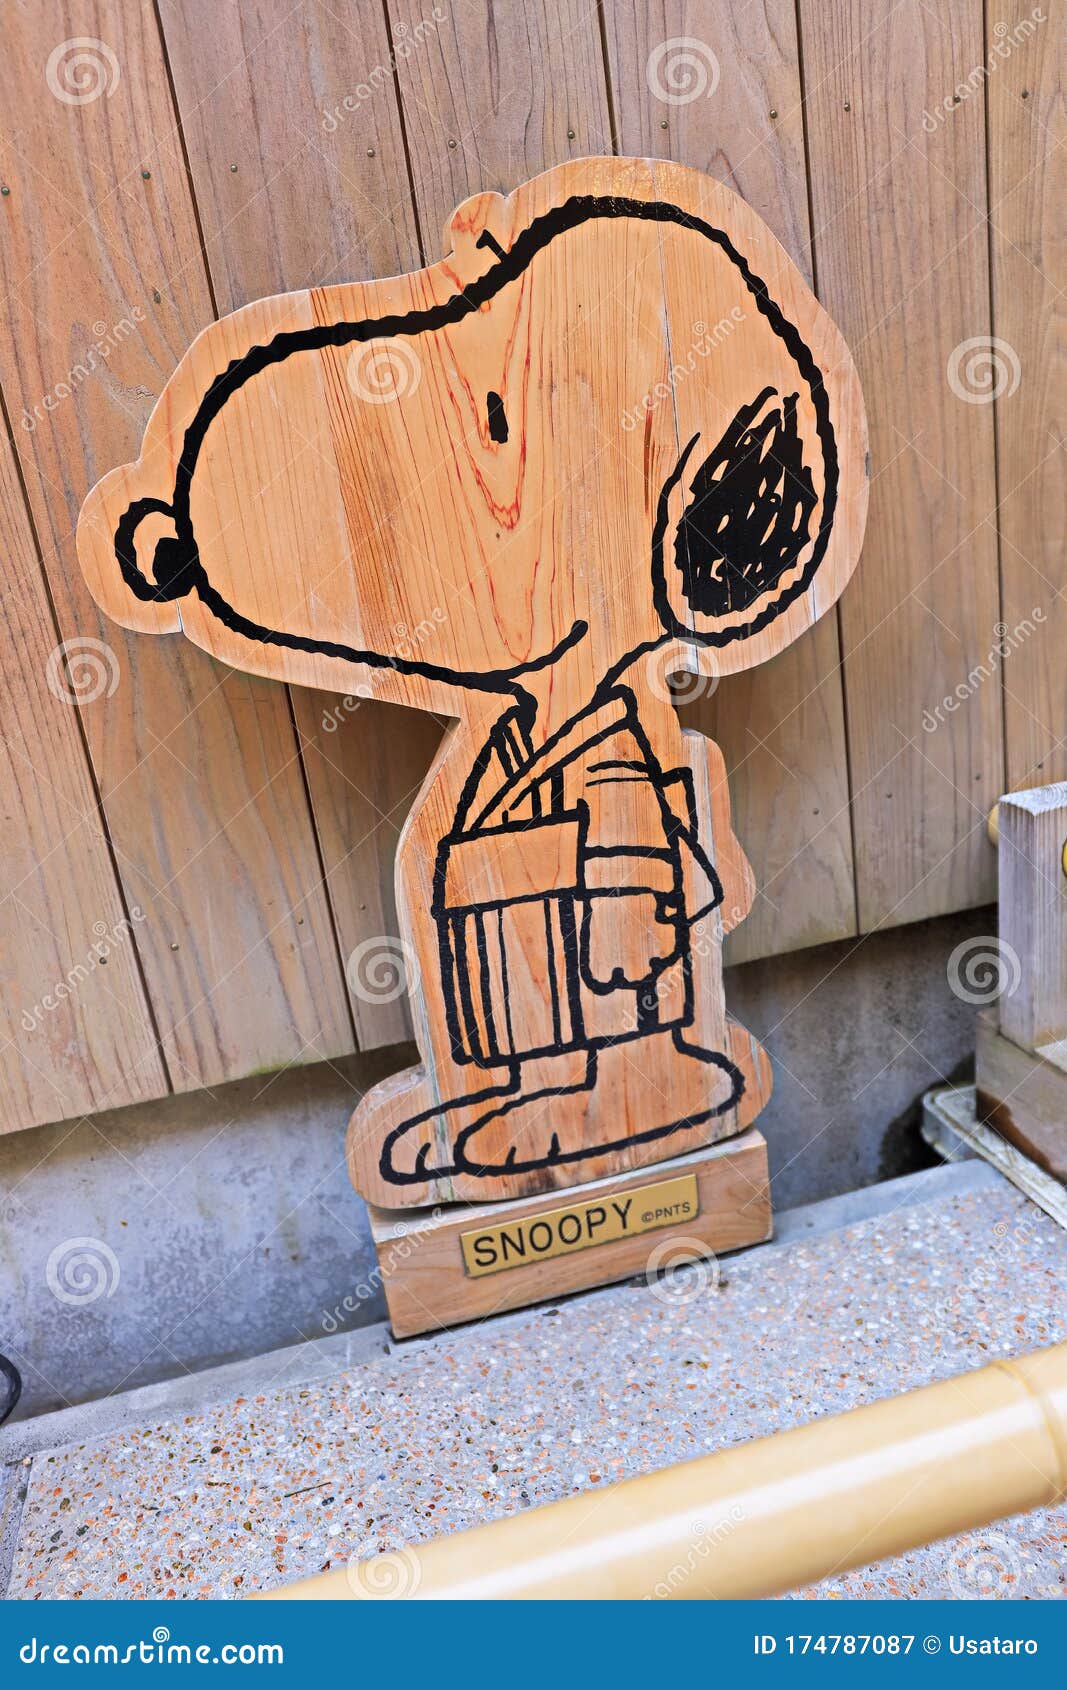 Snoopy Smile Funny Face Cute Peanuts Comics Character Woodwork Statue  Editorial Photography - Image of hotel, cartoon: 174787087